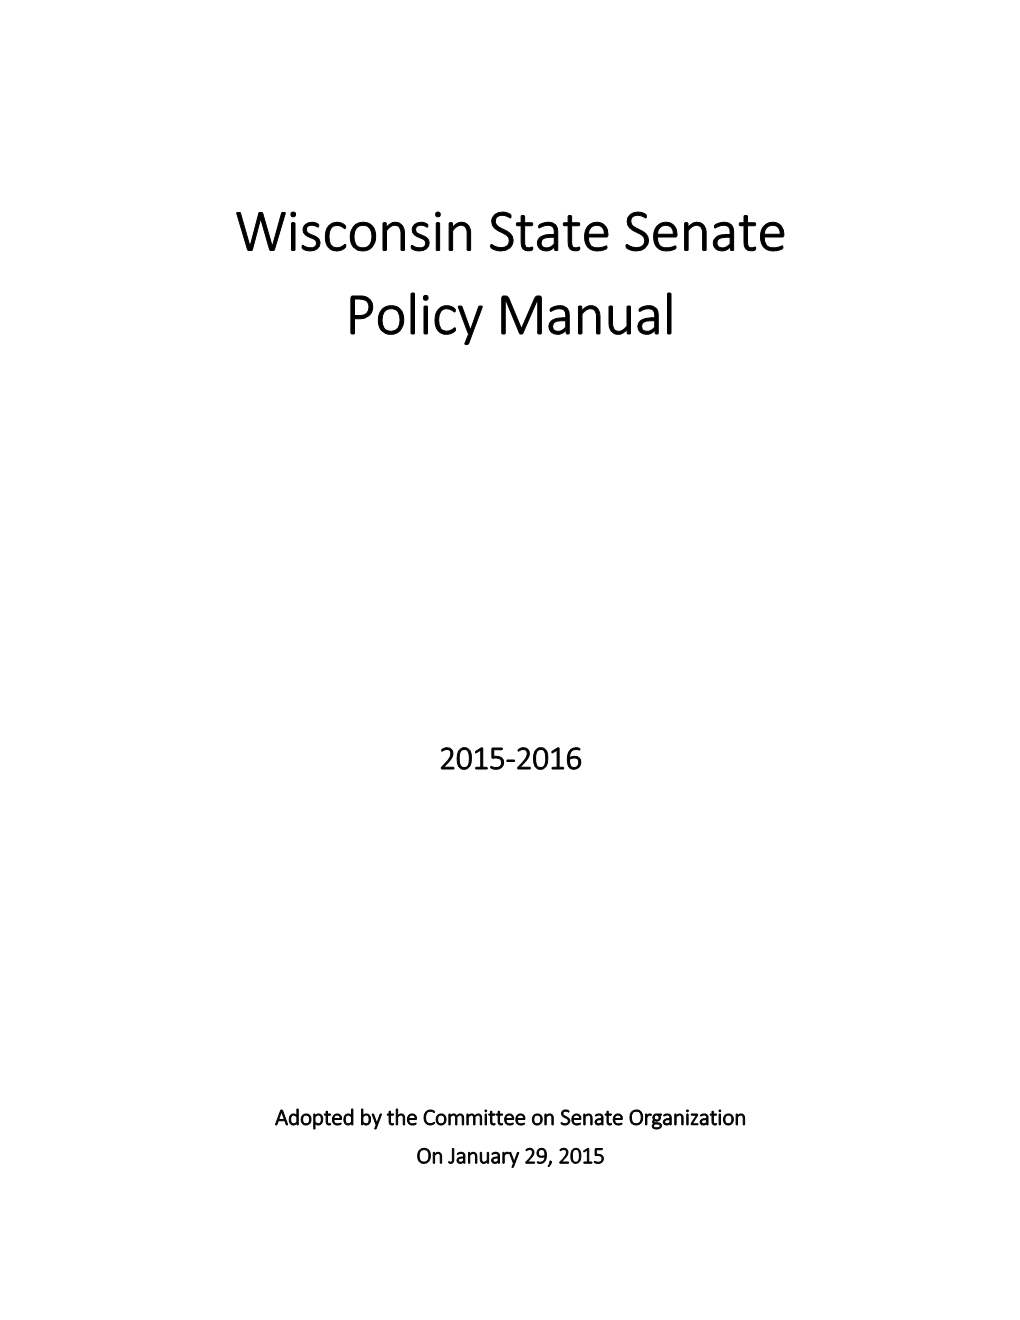 Wisconsin State Senate Policy Manual